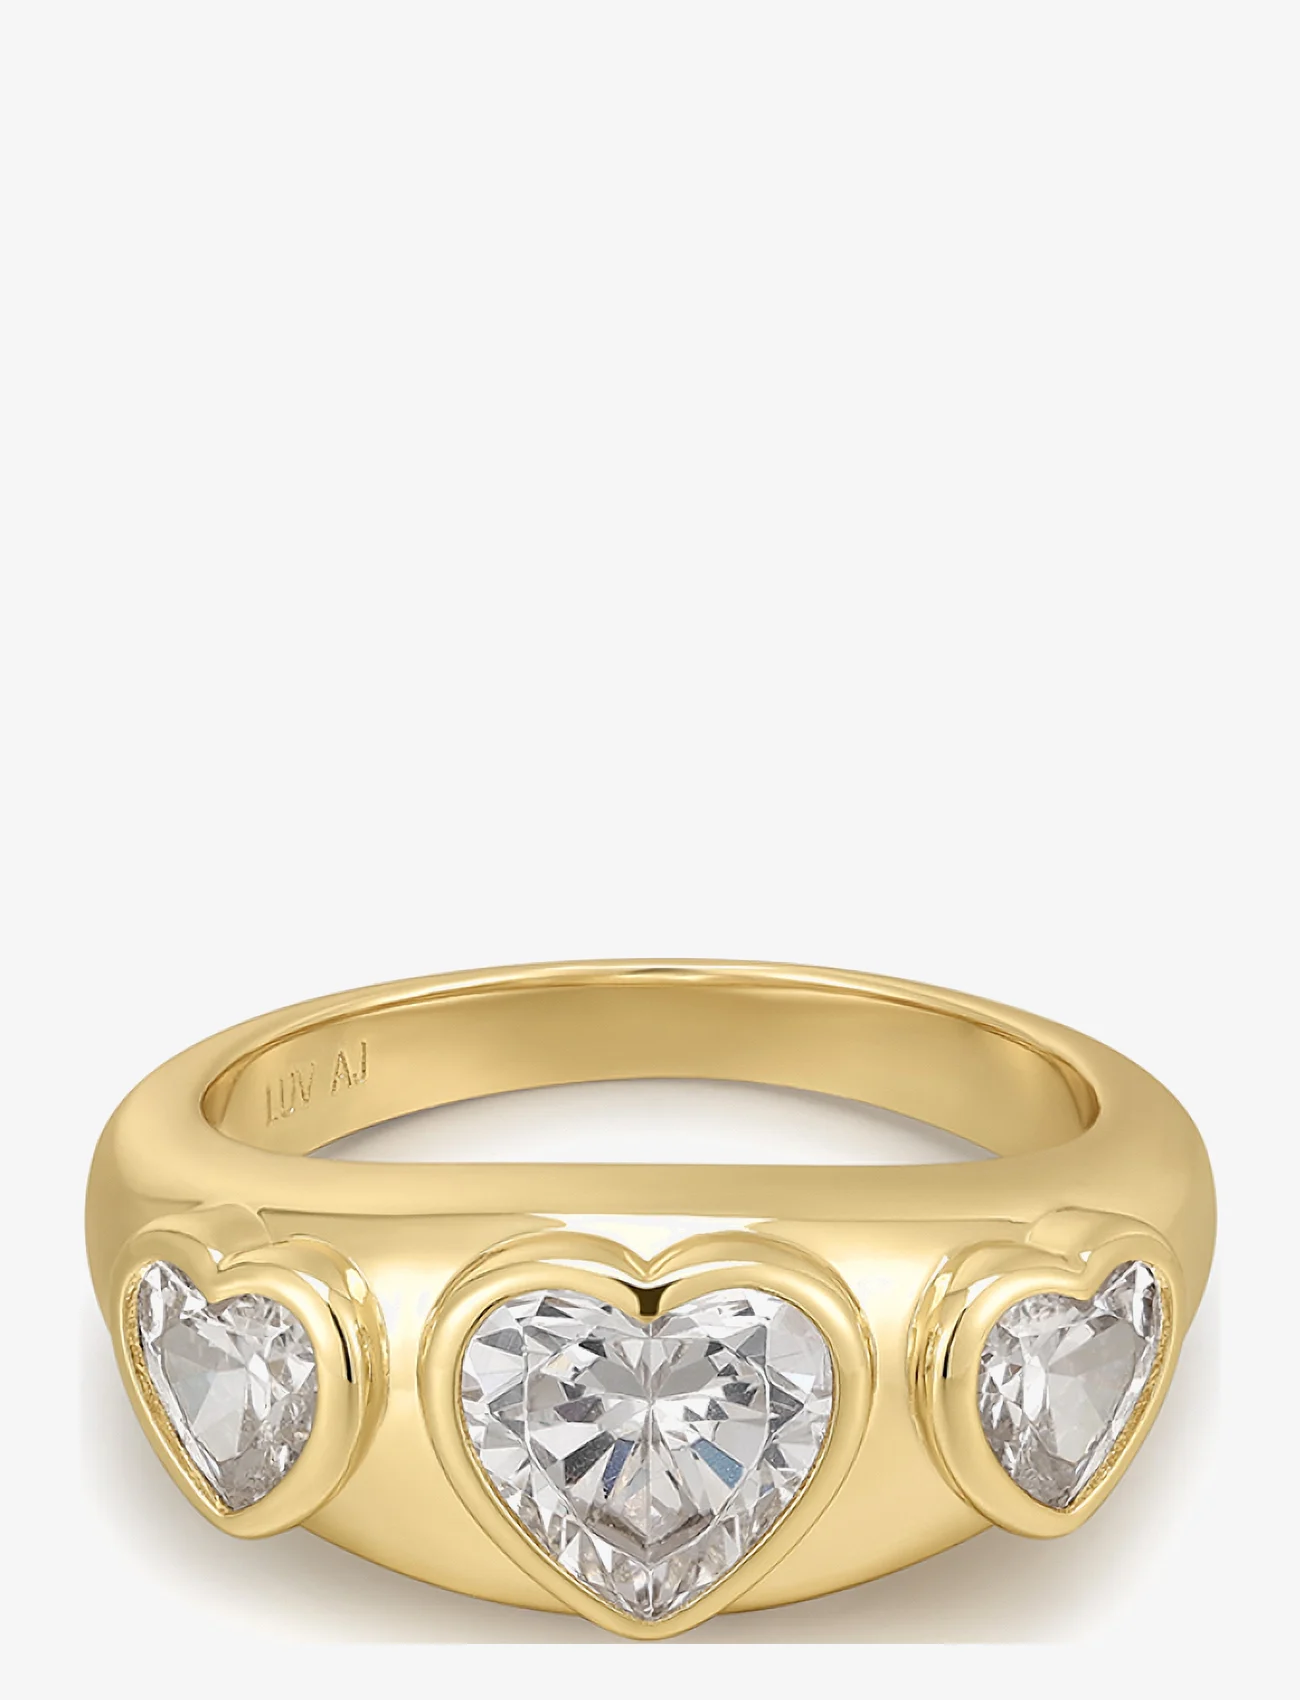 LUV AJ - The Bezel Heart Signet Ring- Gold- Size 8 - party wear at outlet prices - gold - 0